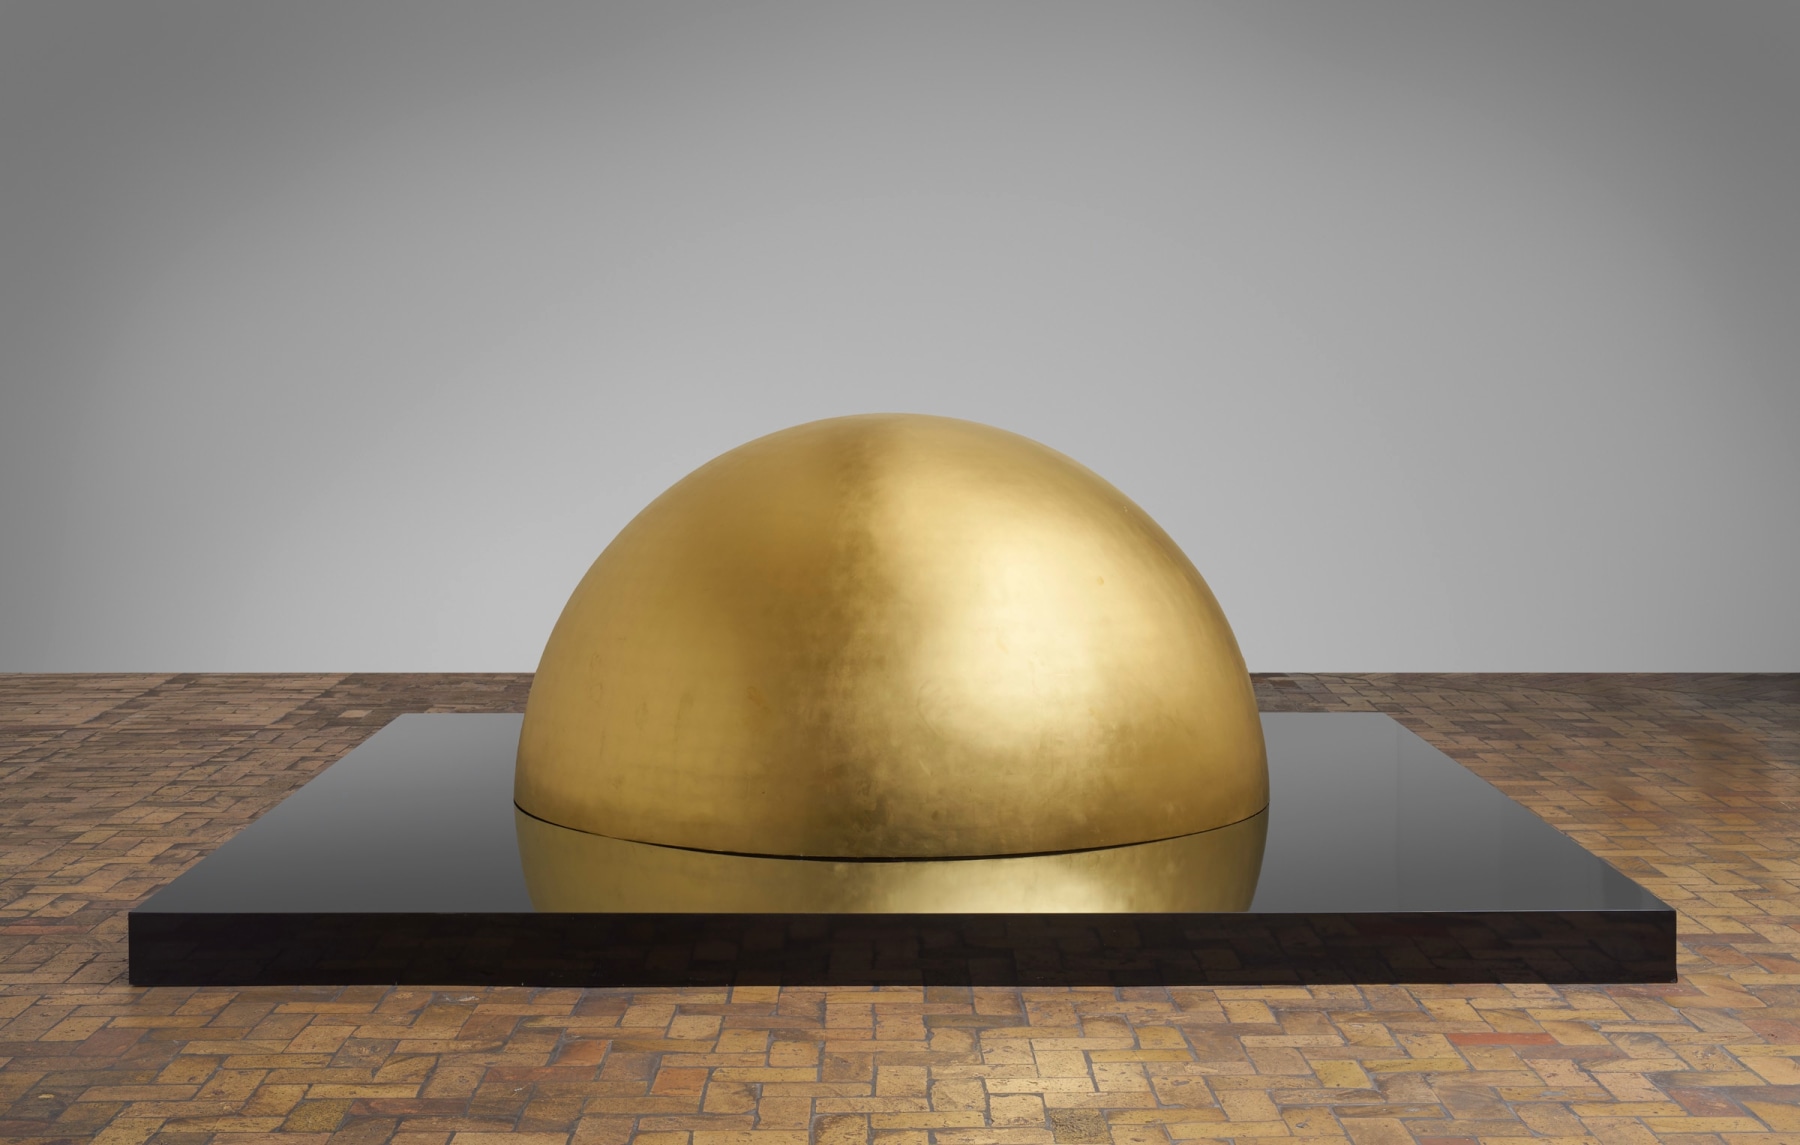 James Lee Byars

&amp;ldquo;The Capital of the Golden Tower&amp;rdquo;, 1991

Stainless steel, 24 karat gold, painted wood

Gilded steel:

49 1/4 x 98 1/2 x 98 1/2 inches

125 x 250 x 250 cm

Painted wood:

7 1/2 x 157 1/2 x 157 1/2 inches

19 x 400 x 400 cm

JB 125/A

$1,200,000